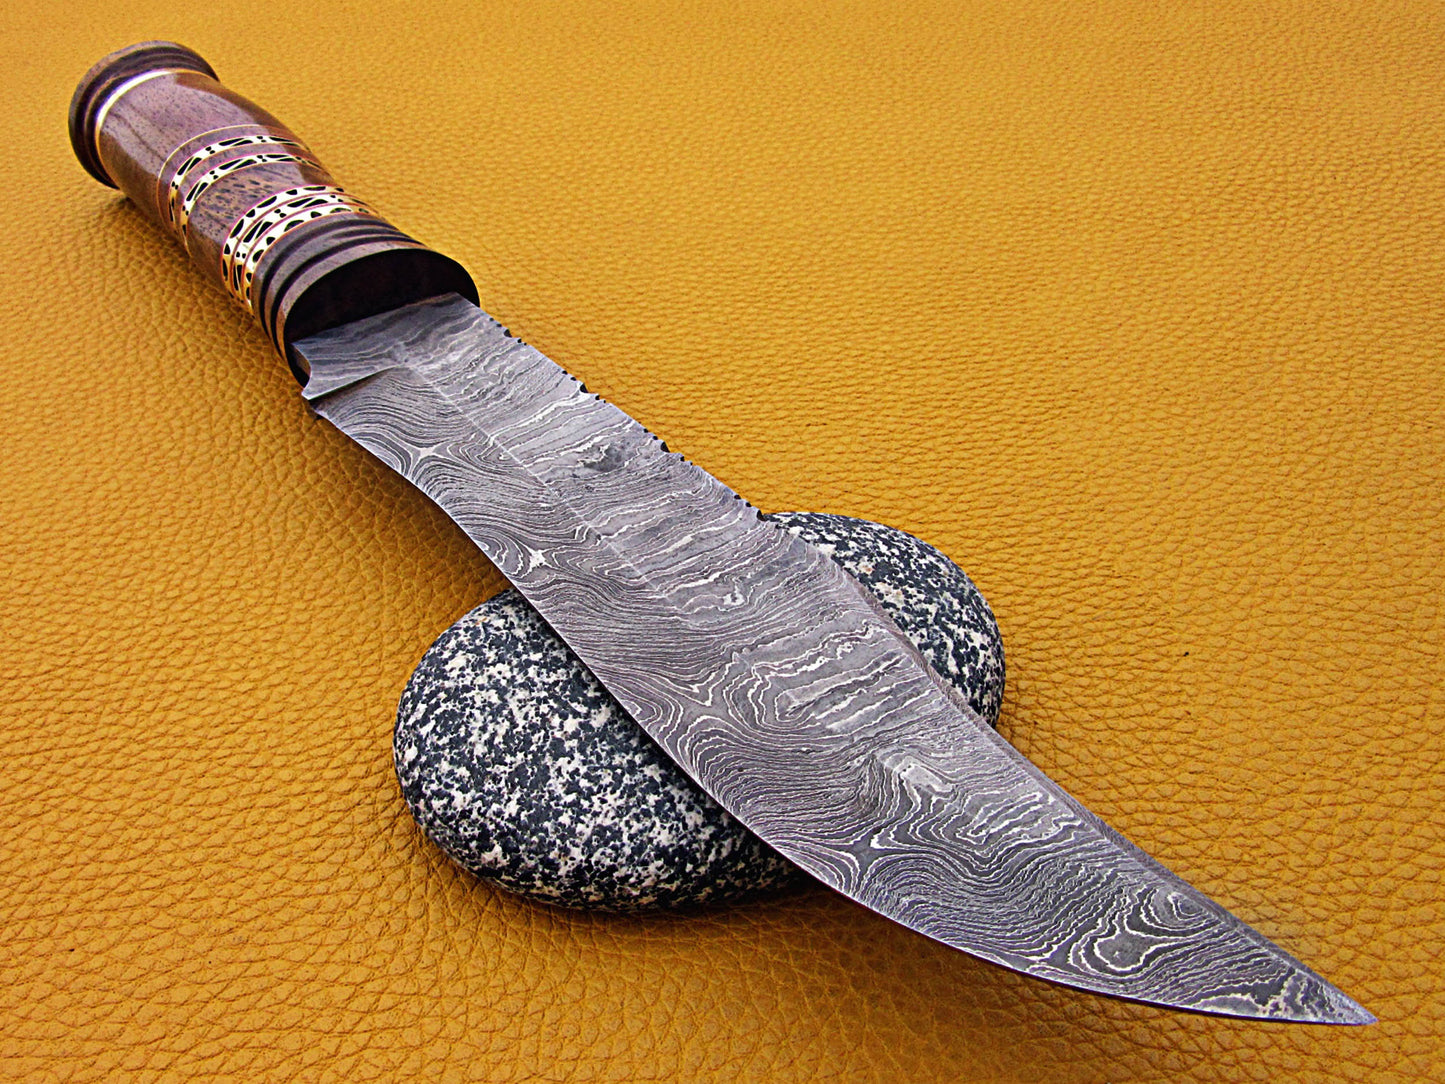 13.5" Long hand forged Damascus steel exotic Hunting Knife with 7" blade, Exotic Rose wood scale crafted with engraved brass & fiber spacing, Cow Leather sheath included